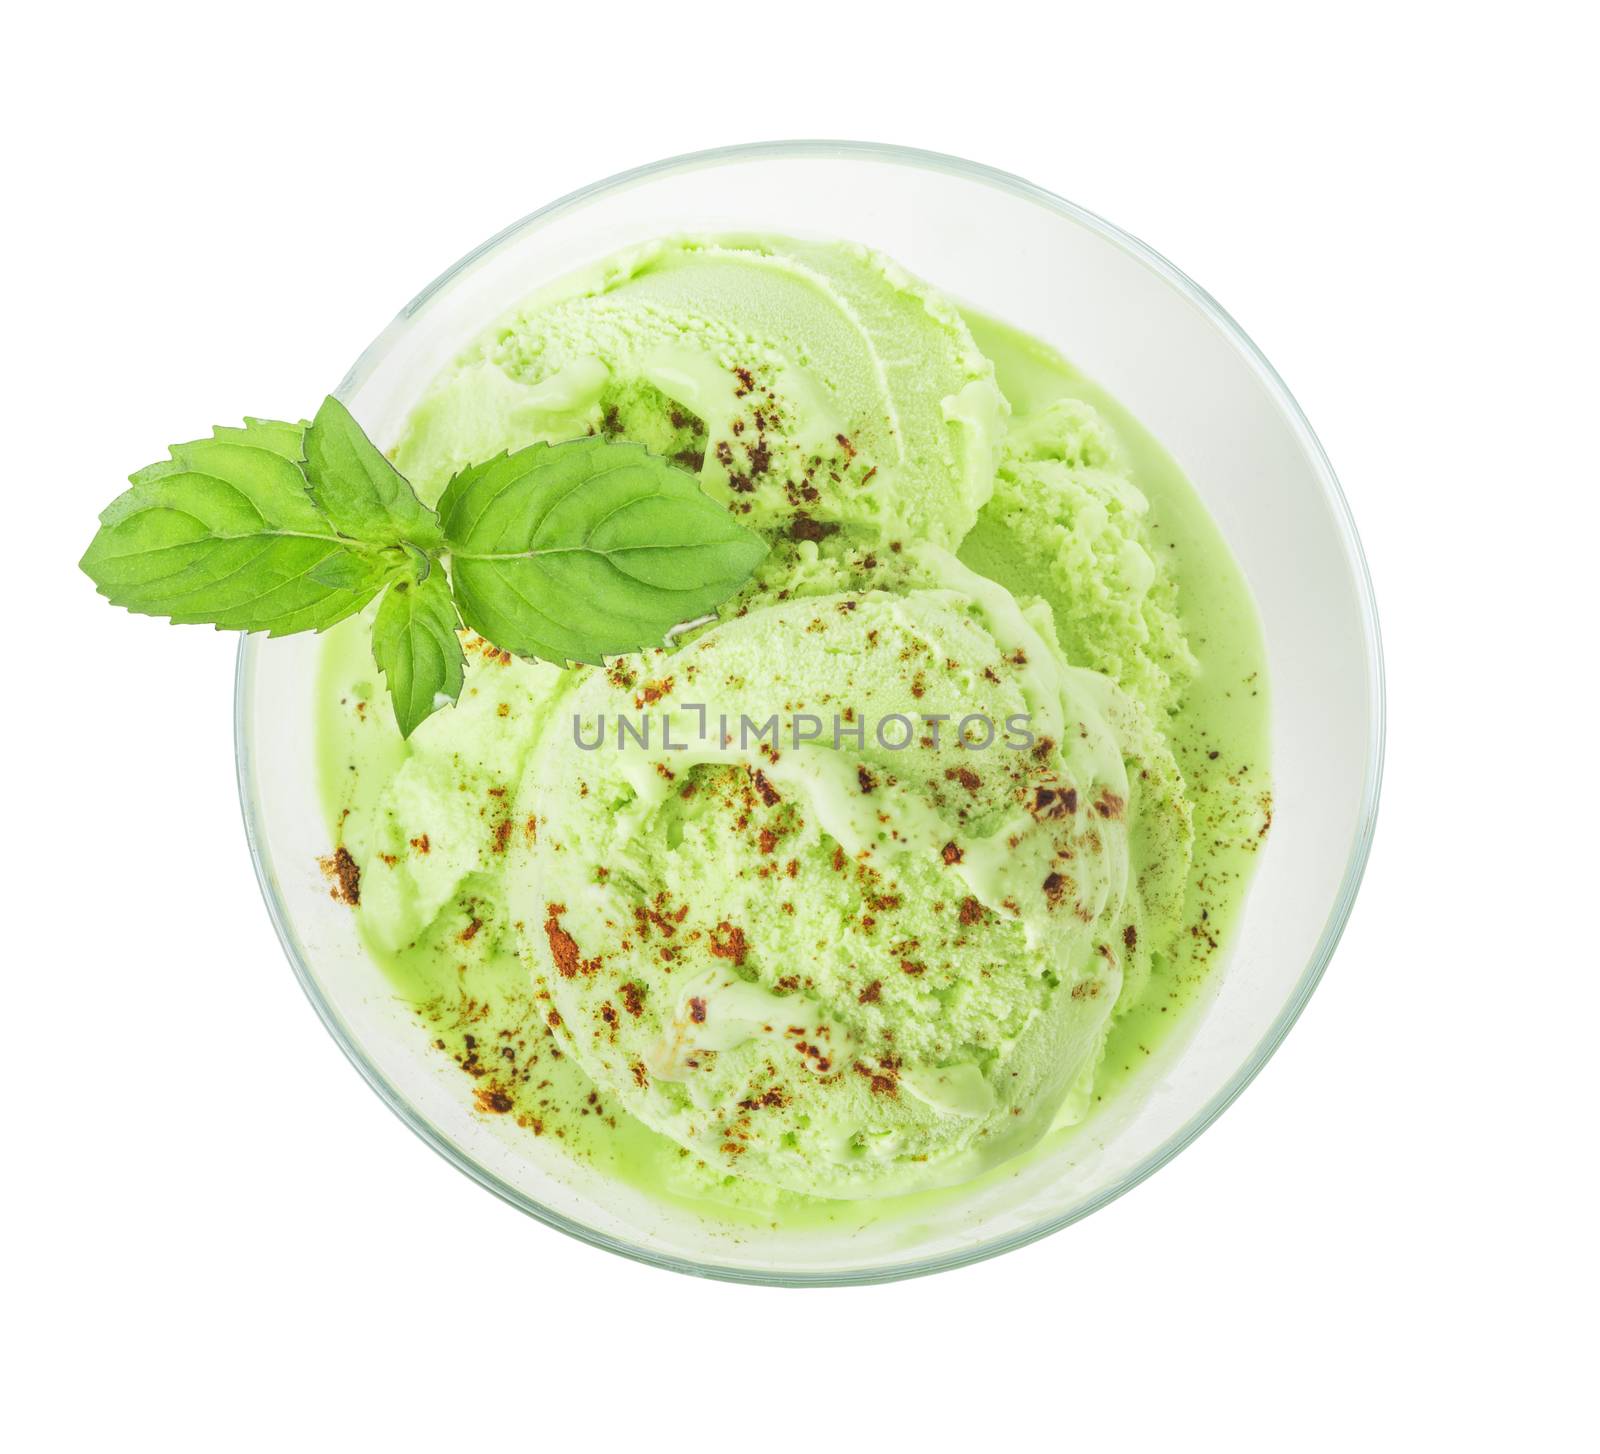 Green mint or pistachio ice cream and a sprig of fresh mint closeup, top view, isolated on white background